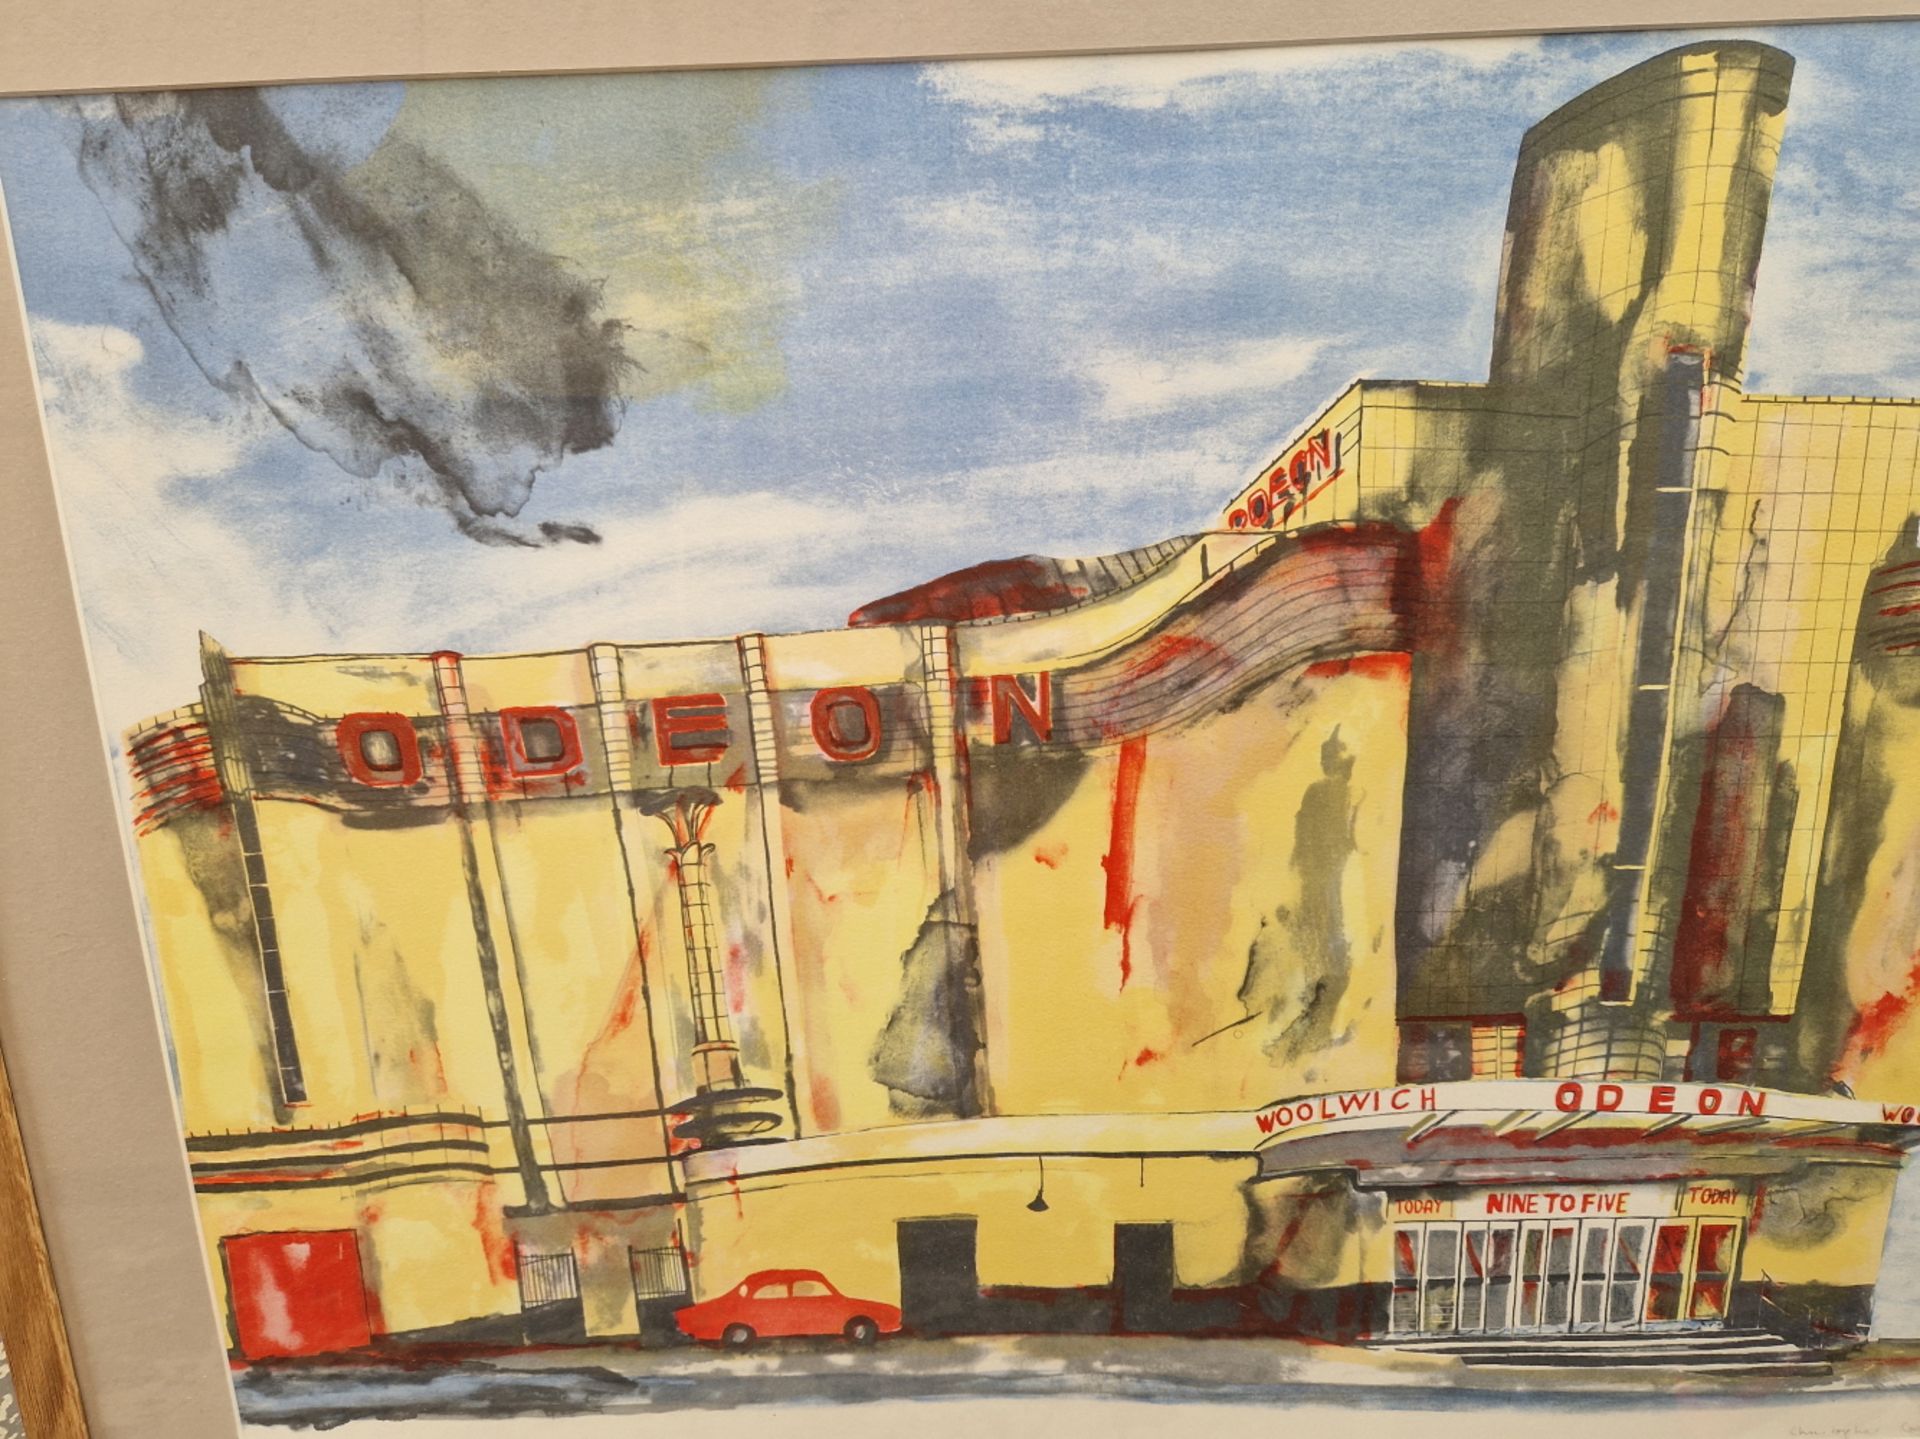 CHRISTOPHER CORR ) 1955 - ) ARR. WOOLWICH ODEON PENCIL SIGNED LIMITED EDITION COLOUR PRINT 53 x - Image 6 of 10